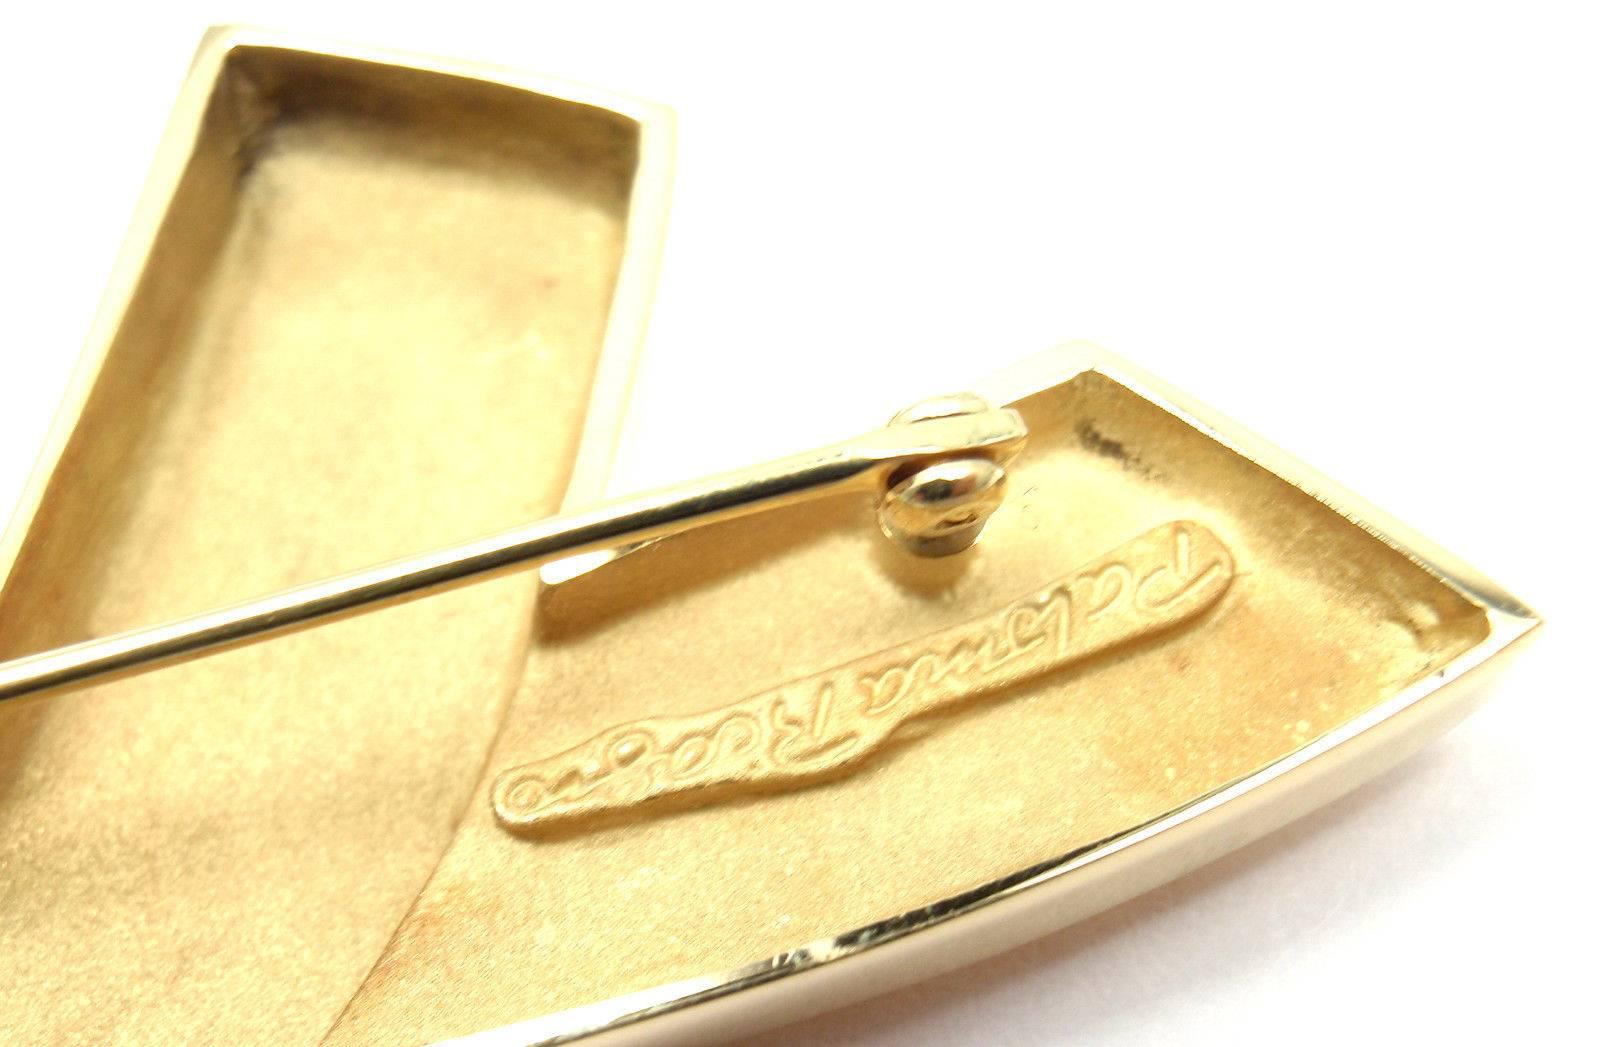 18k Yellow Gold Large X Brooch Pin by Paloma Picasso for Tiffany & Co.   
Details:  
Measurements: 2 3/4